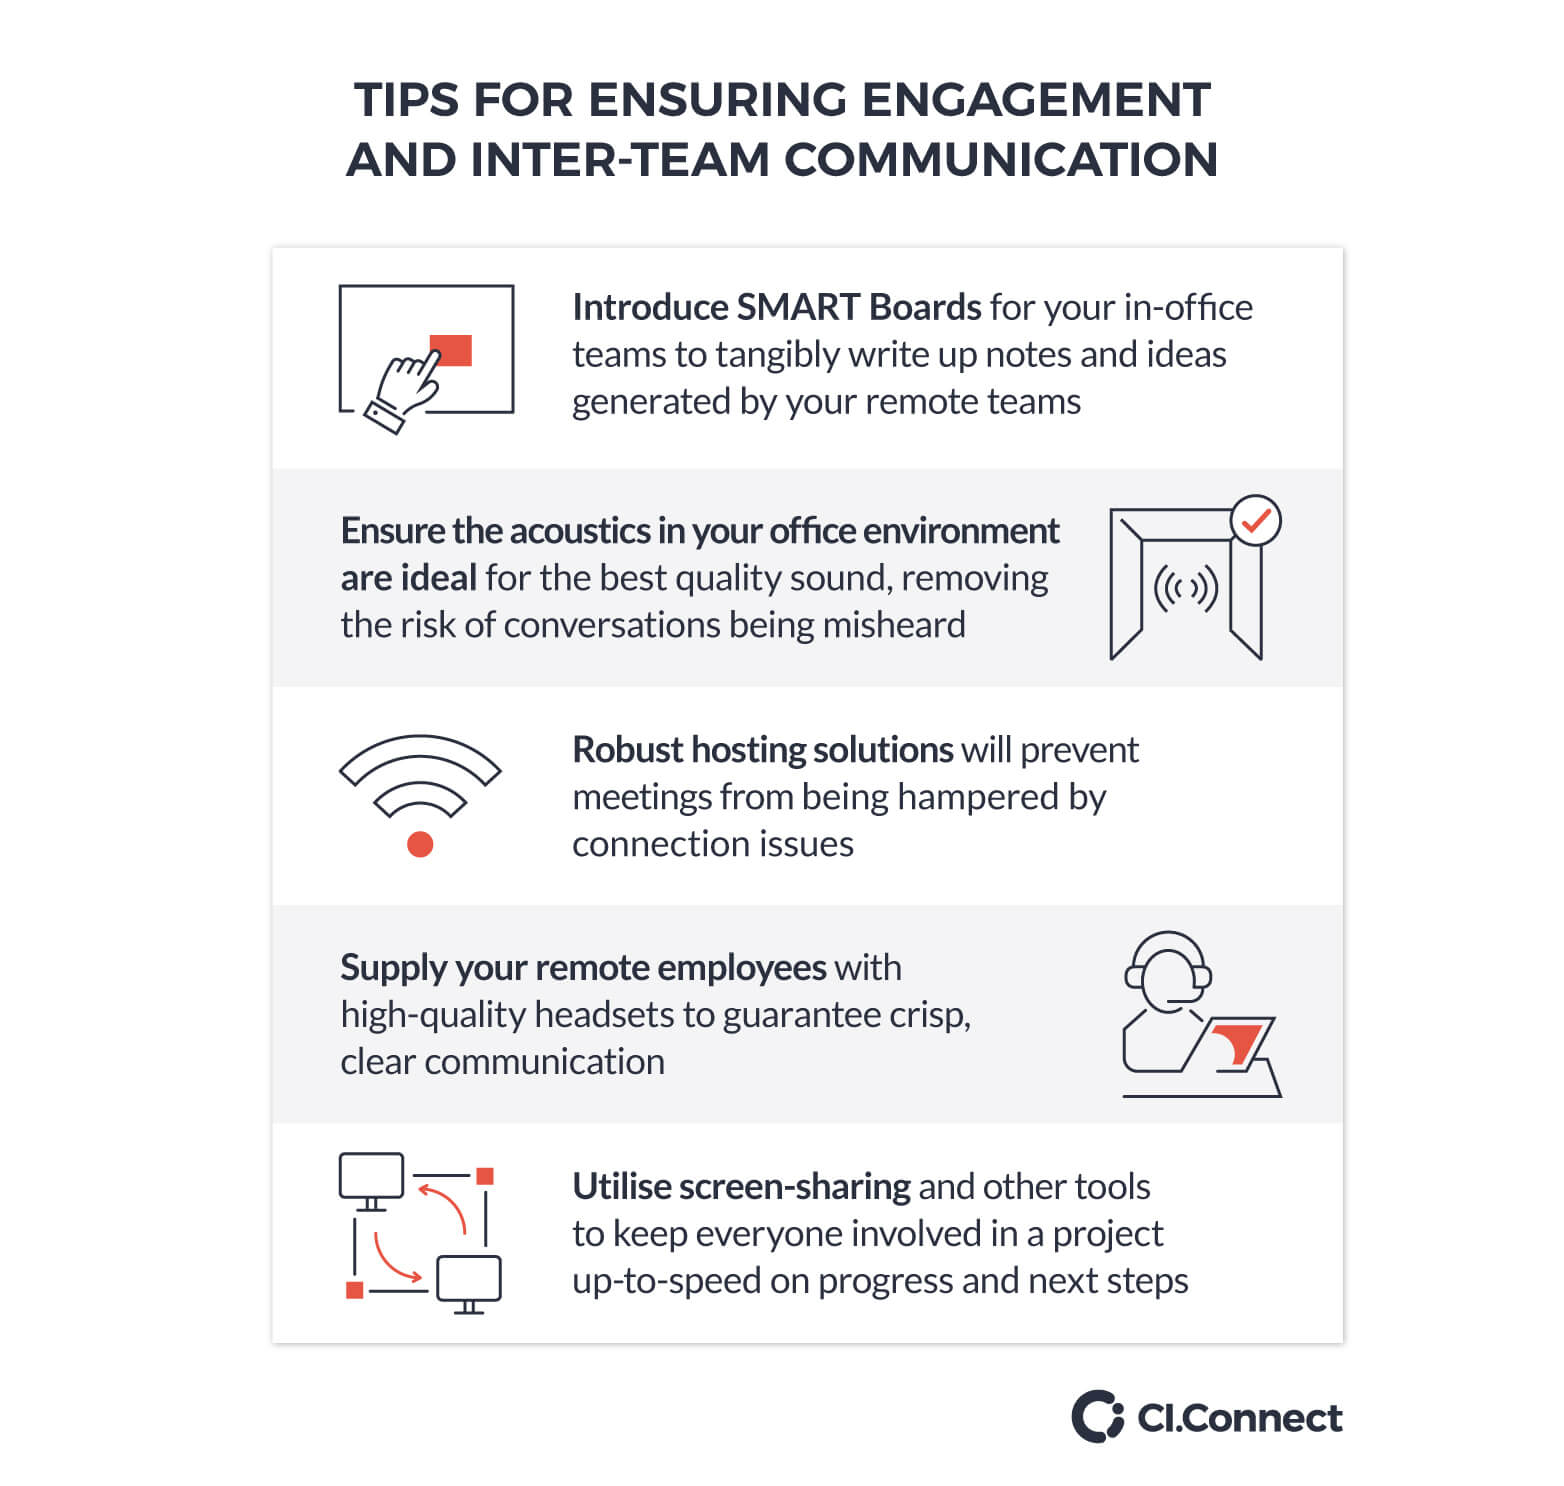 Tips for ensuring engagement and inter-team communication